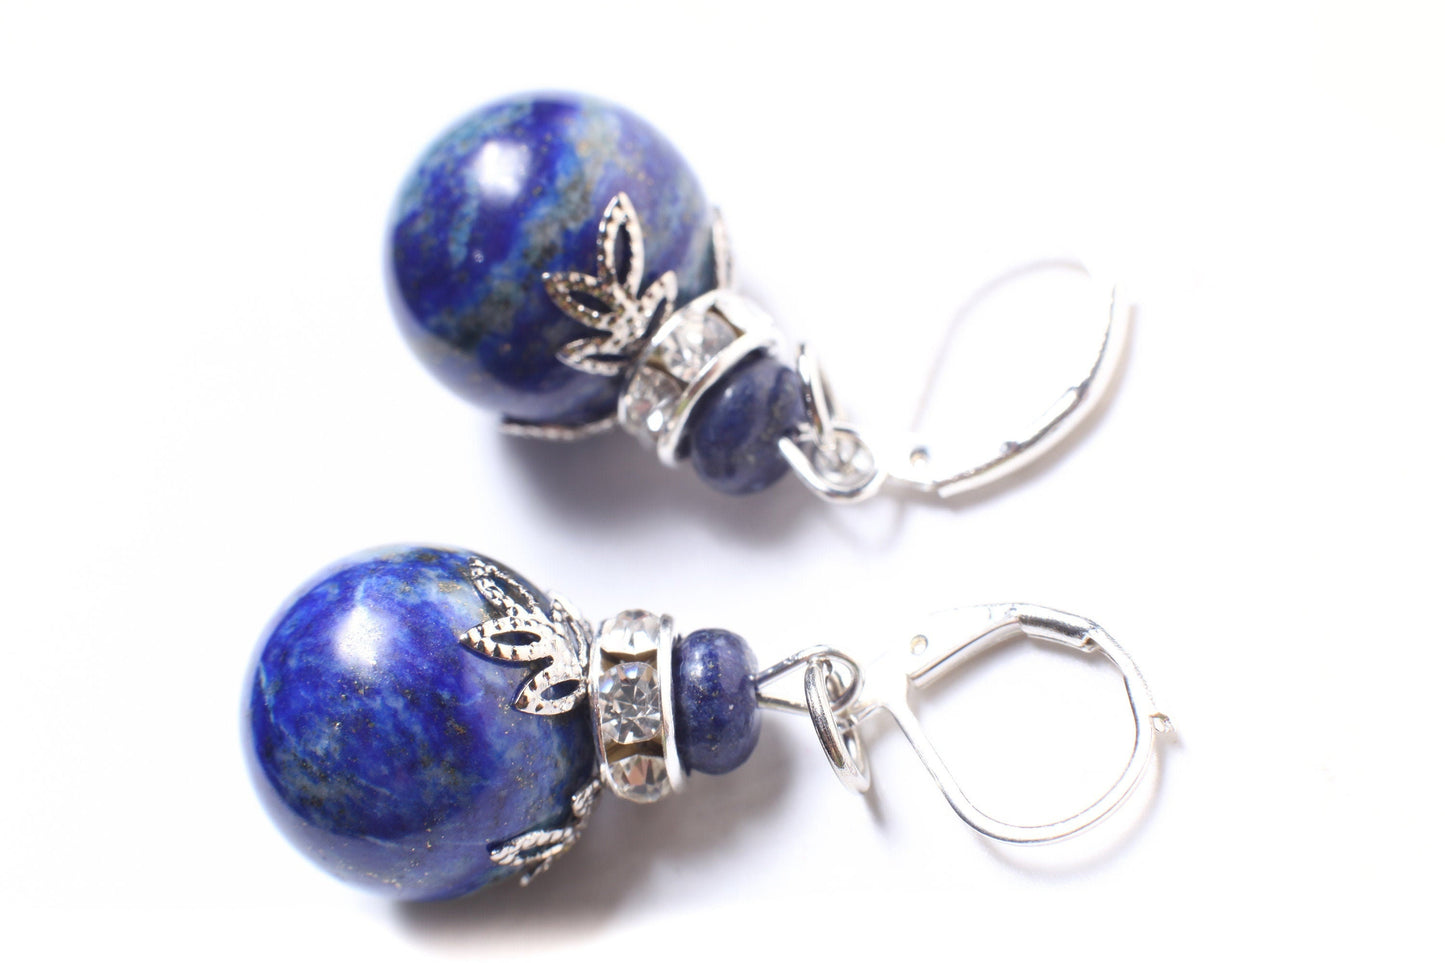 Lapis Lazuli Earrings, Natural Lapis 16mm large round bead, Bali Style Rhodium hammered Bead cap, silver Leverback Ear wire.